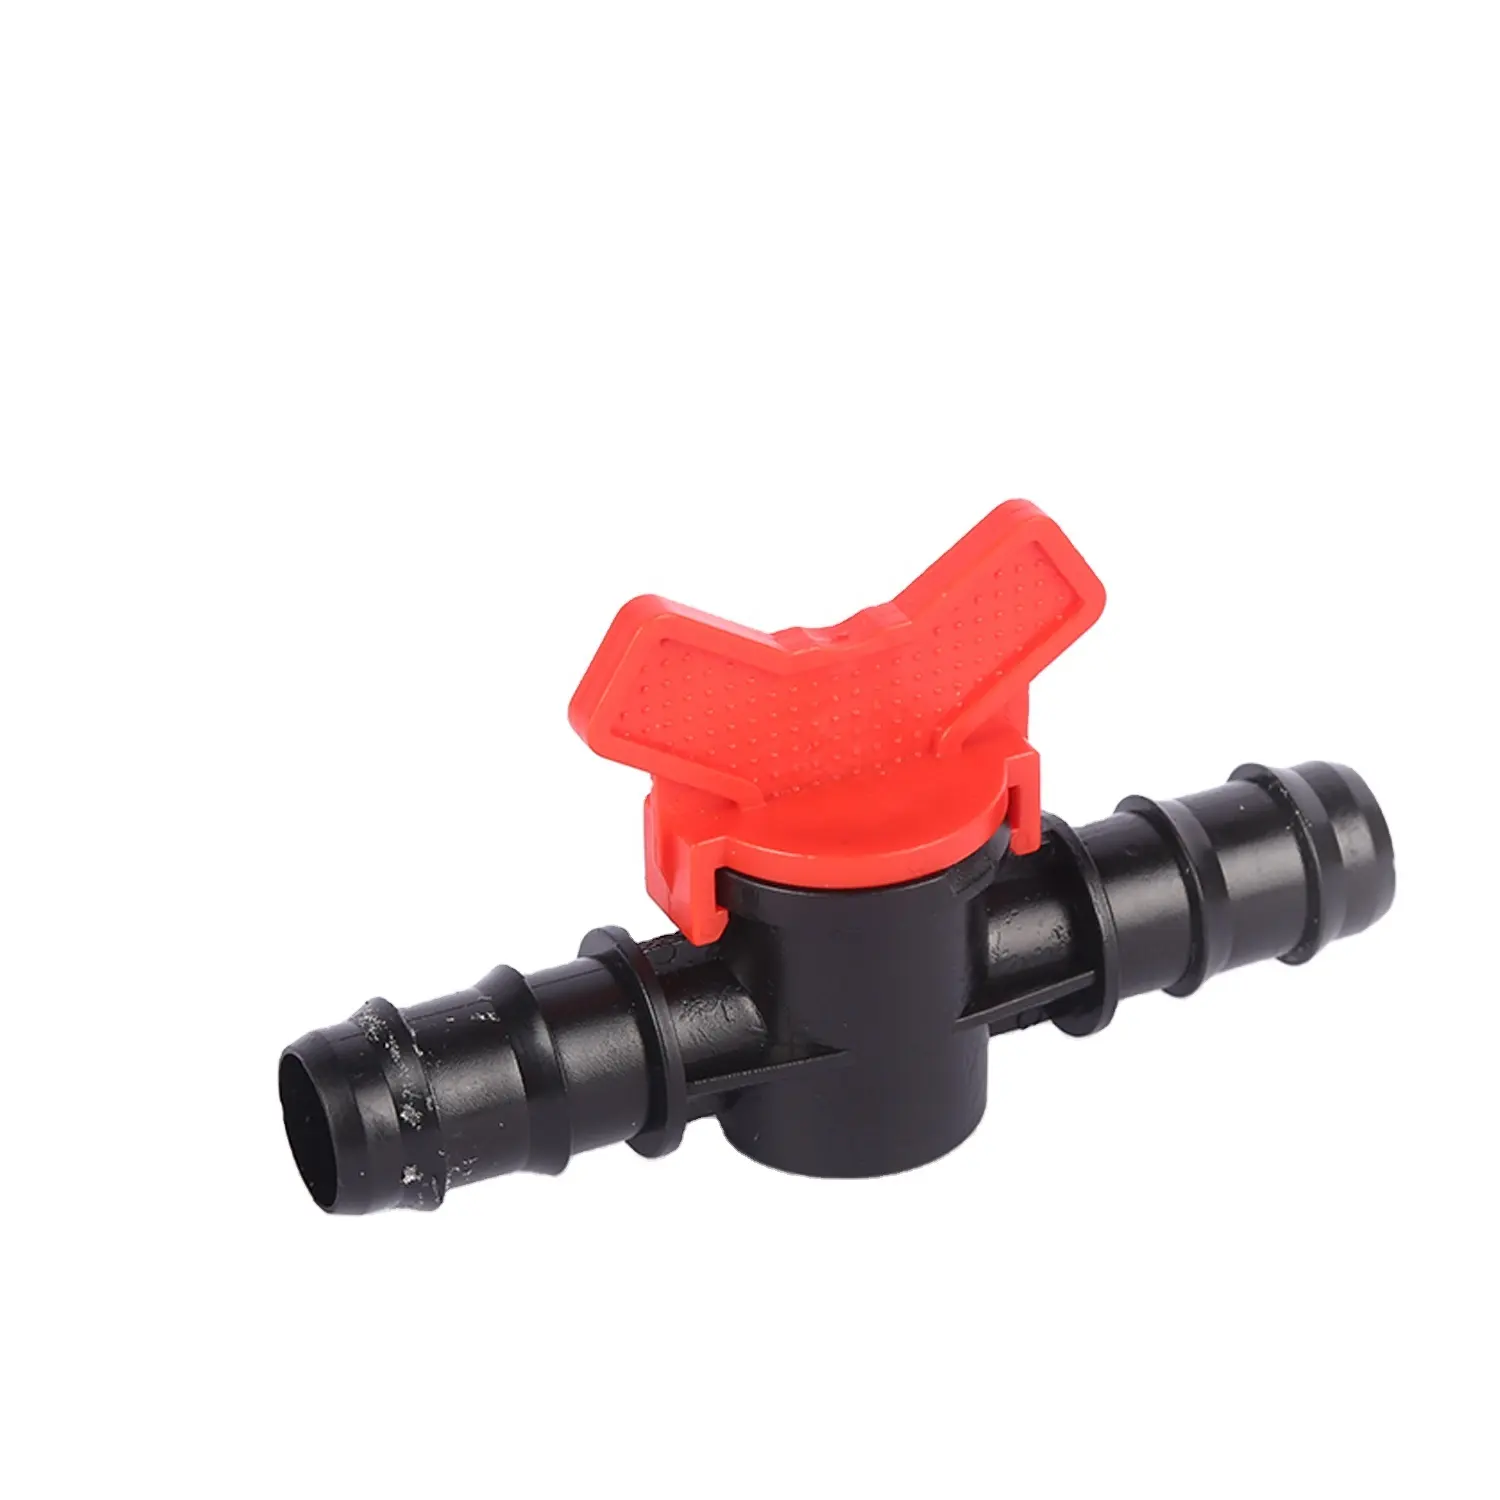 China Manufacturers Plastic Pipe Fittings Pvc Quick Connect Union Straight Garden Sprinklers Hose Bypass 16mm